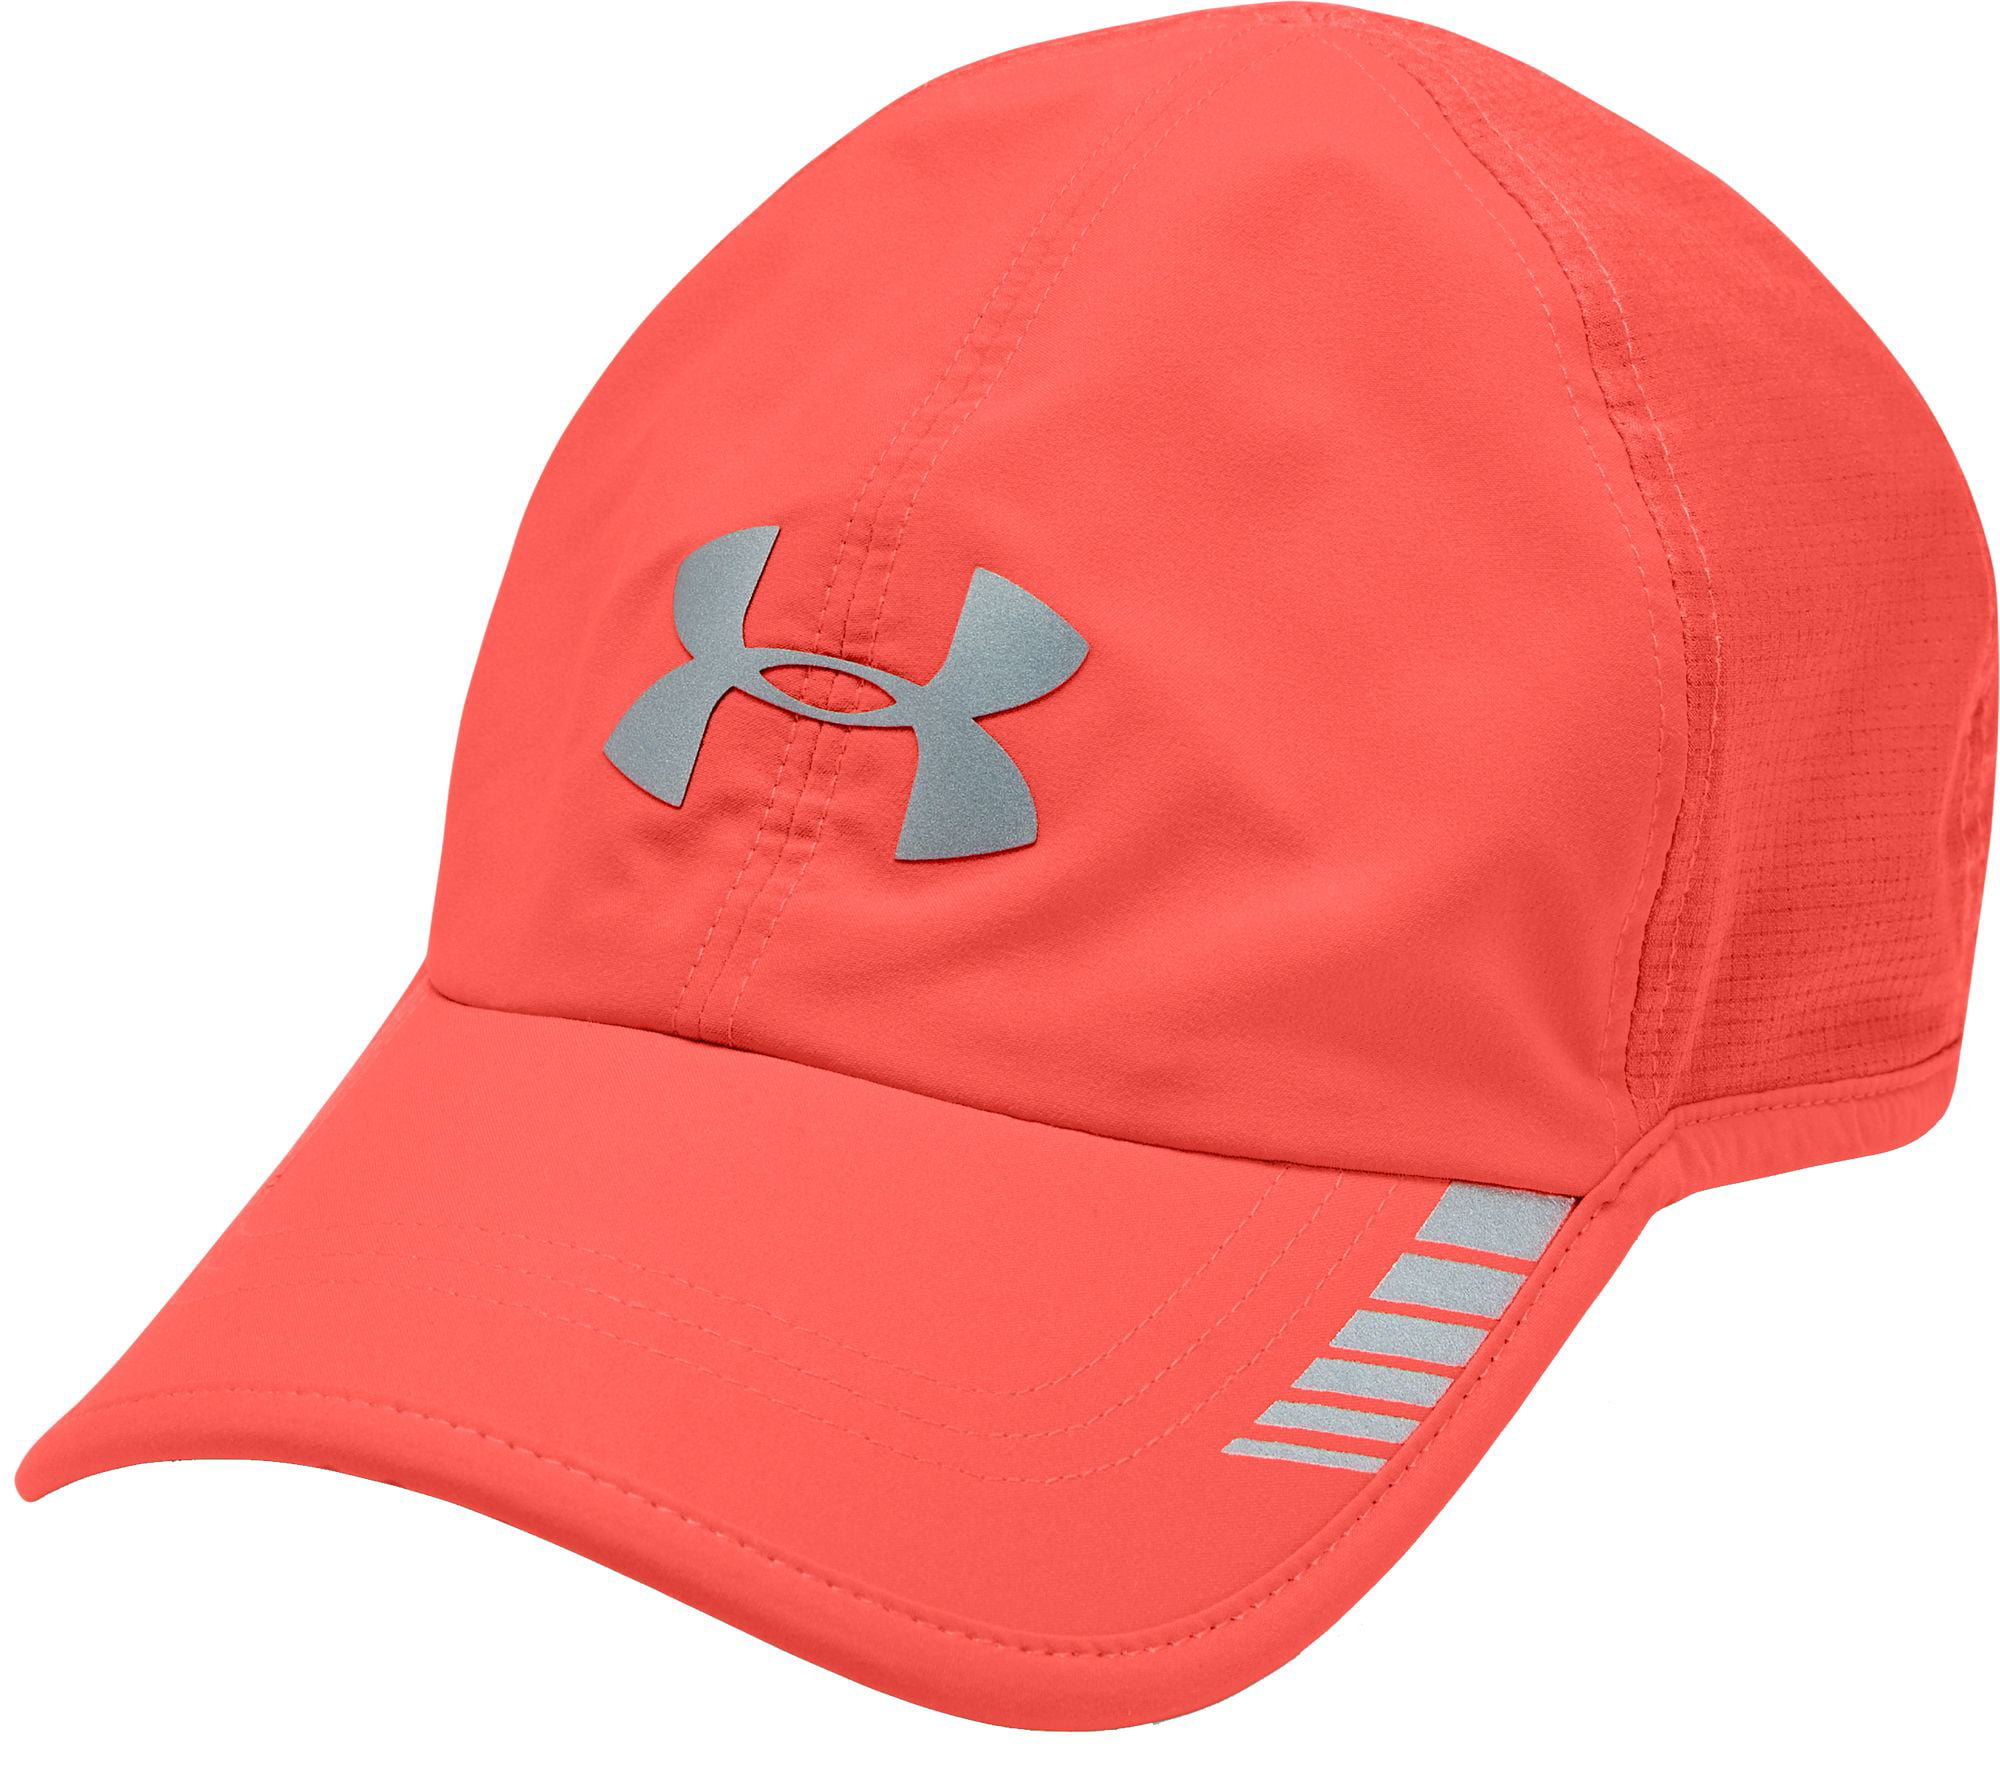 Launch ArmourVent Running Hat 